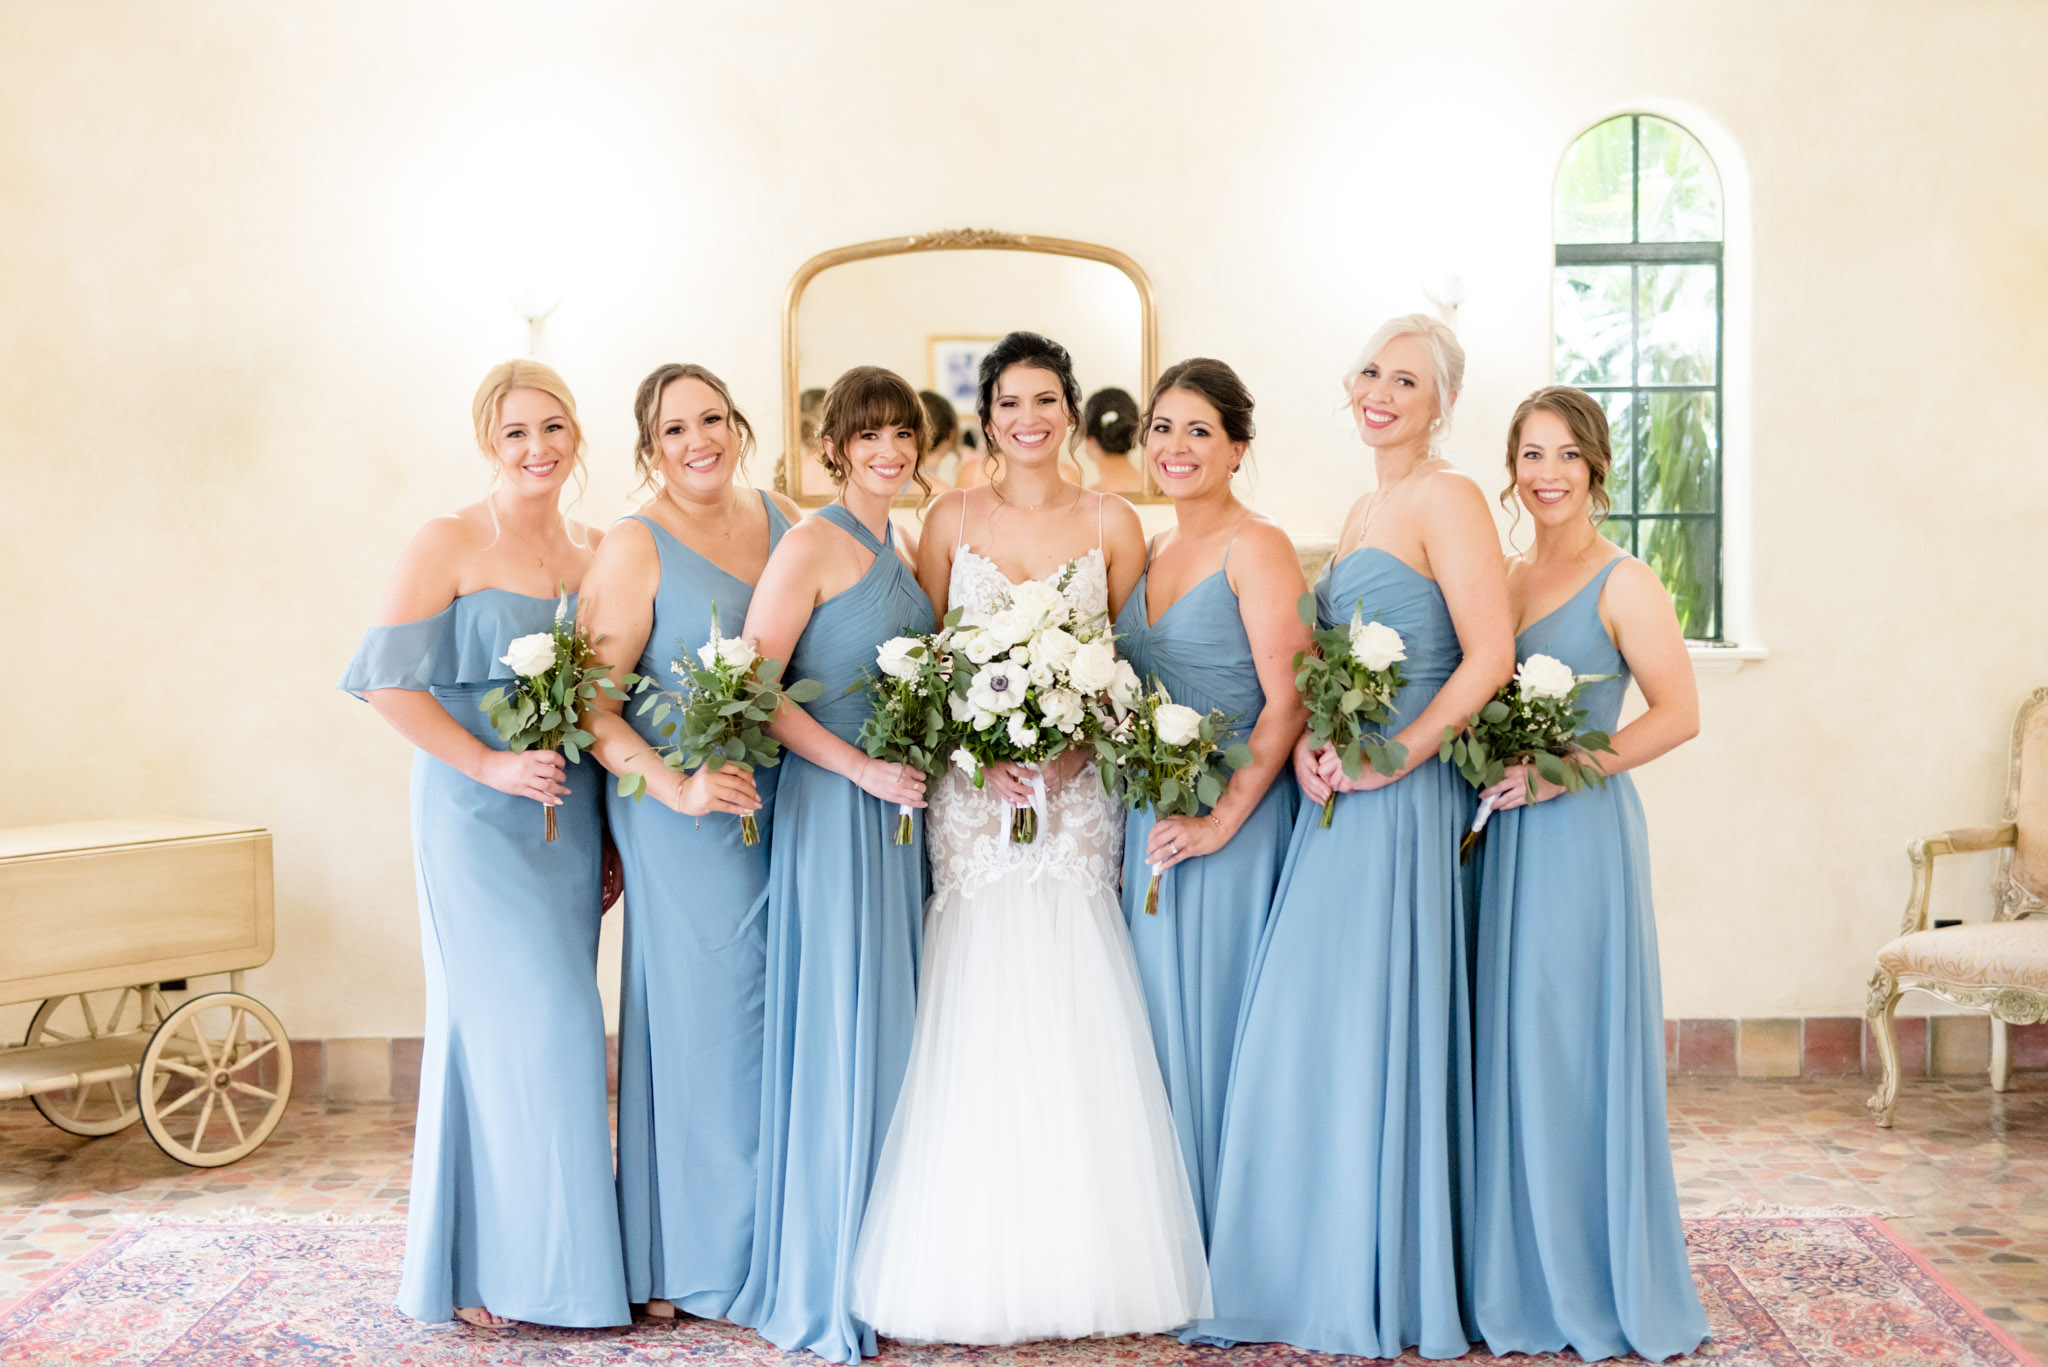 Bride and bridesmaids smile and hold bouquets.